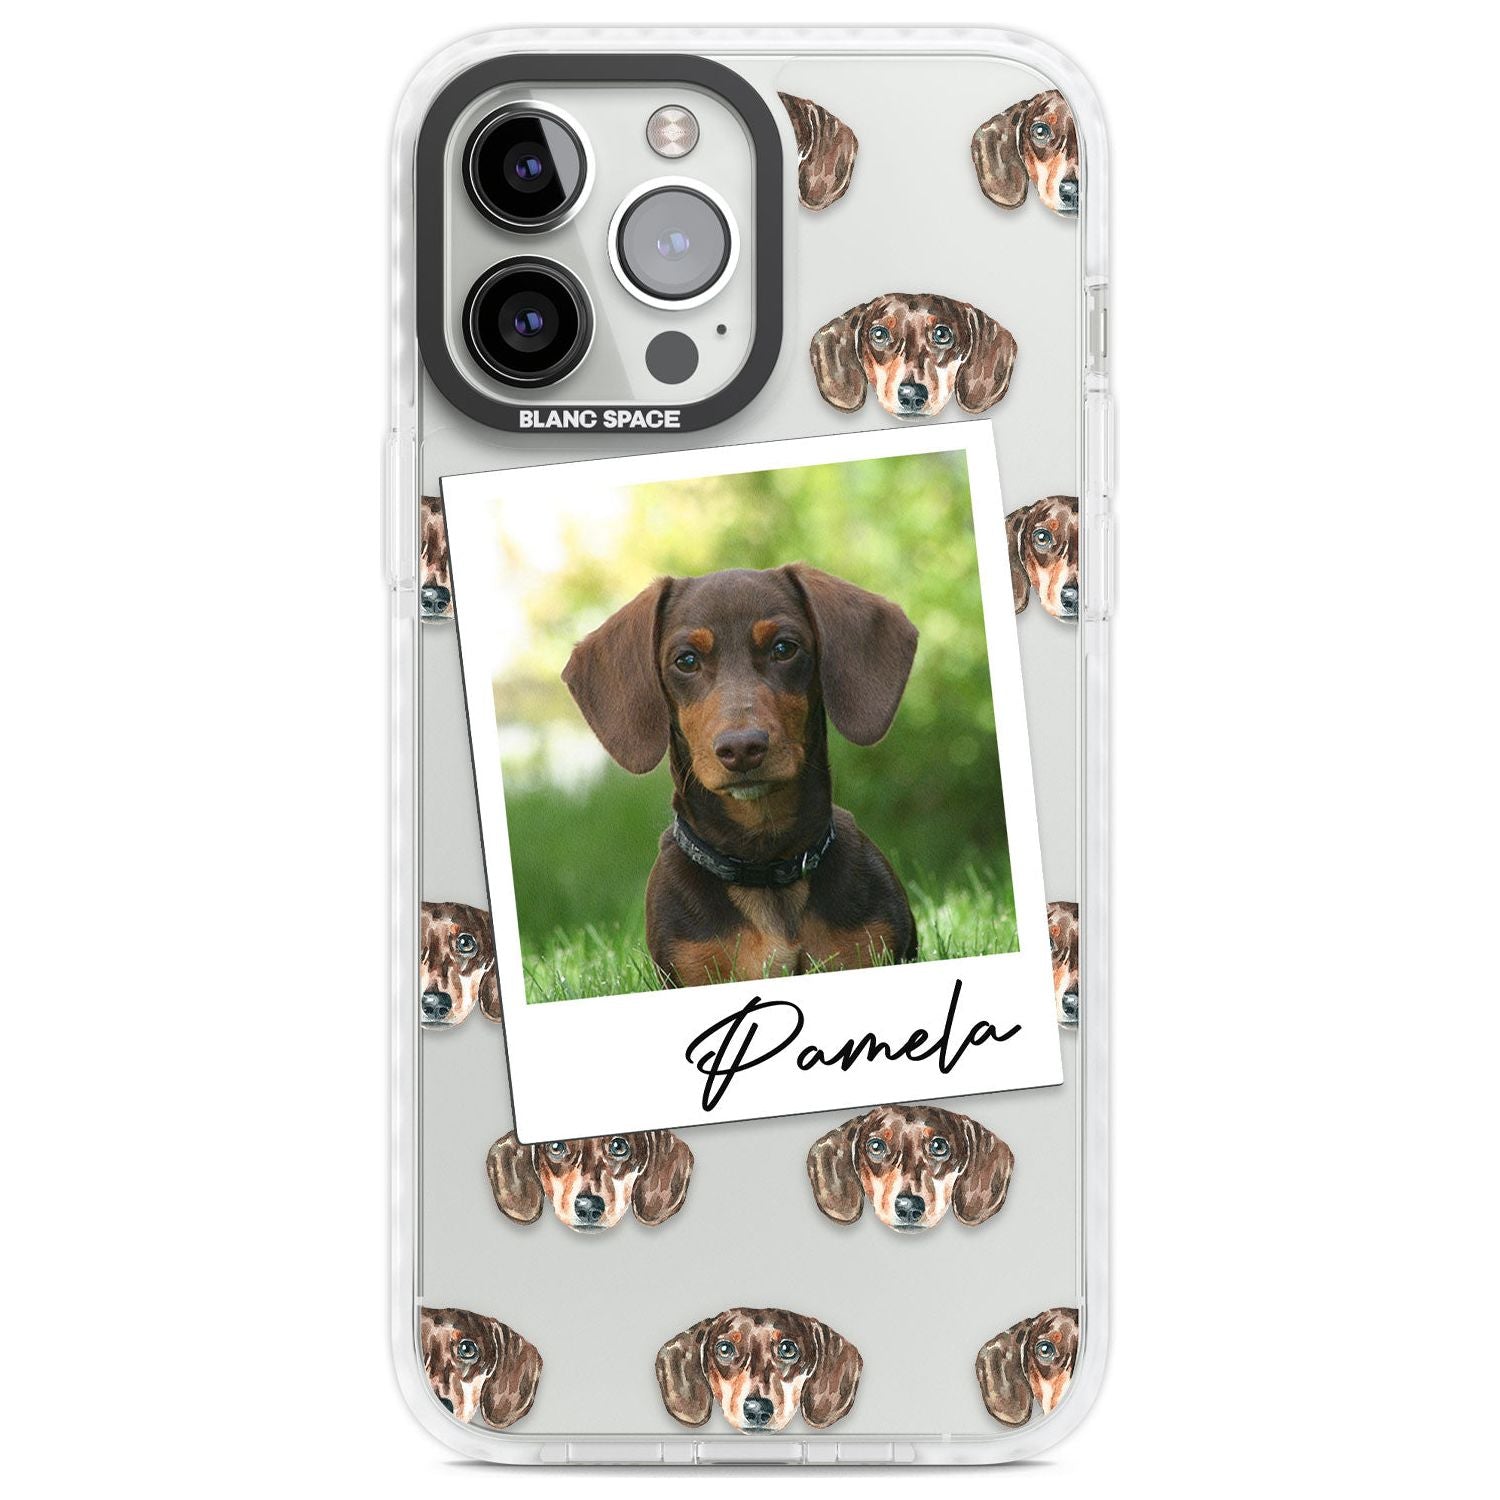 Personalised Dachshund, Brown - Dog Photo Custom Phone Case iPhone 13 Pro Max / Impact Case,iPhone 14 Pro Max / Impact Case Blanc Space